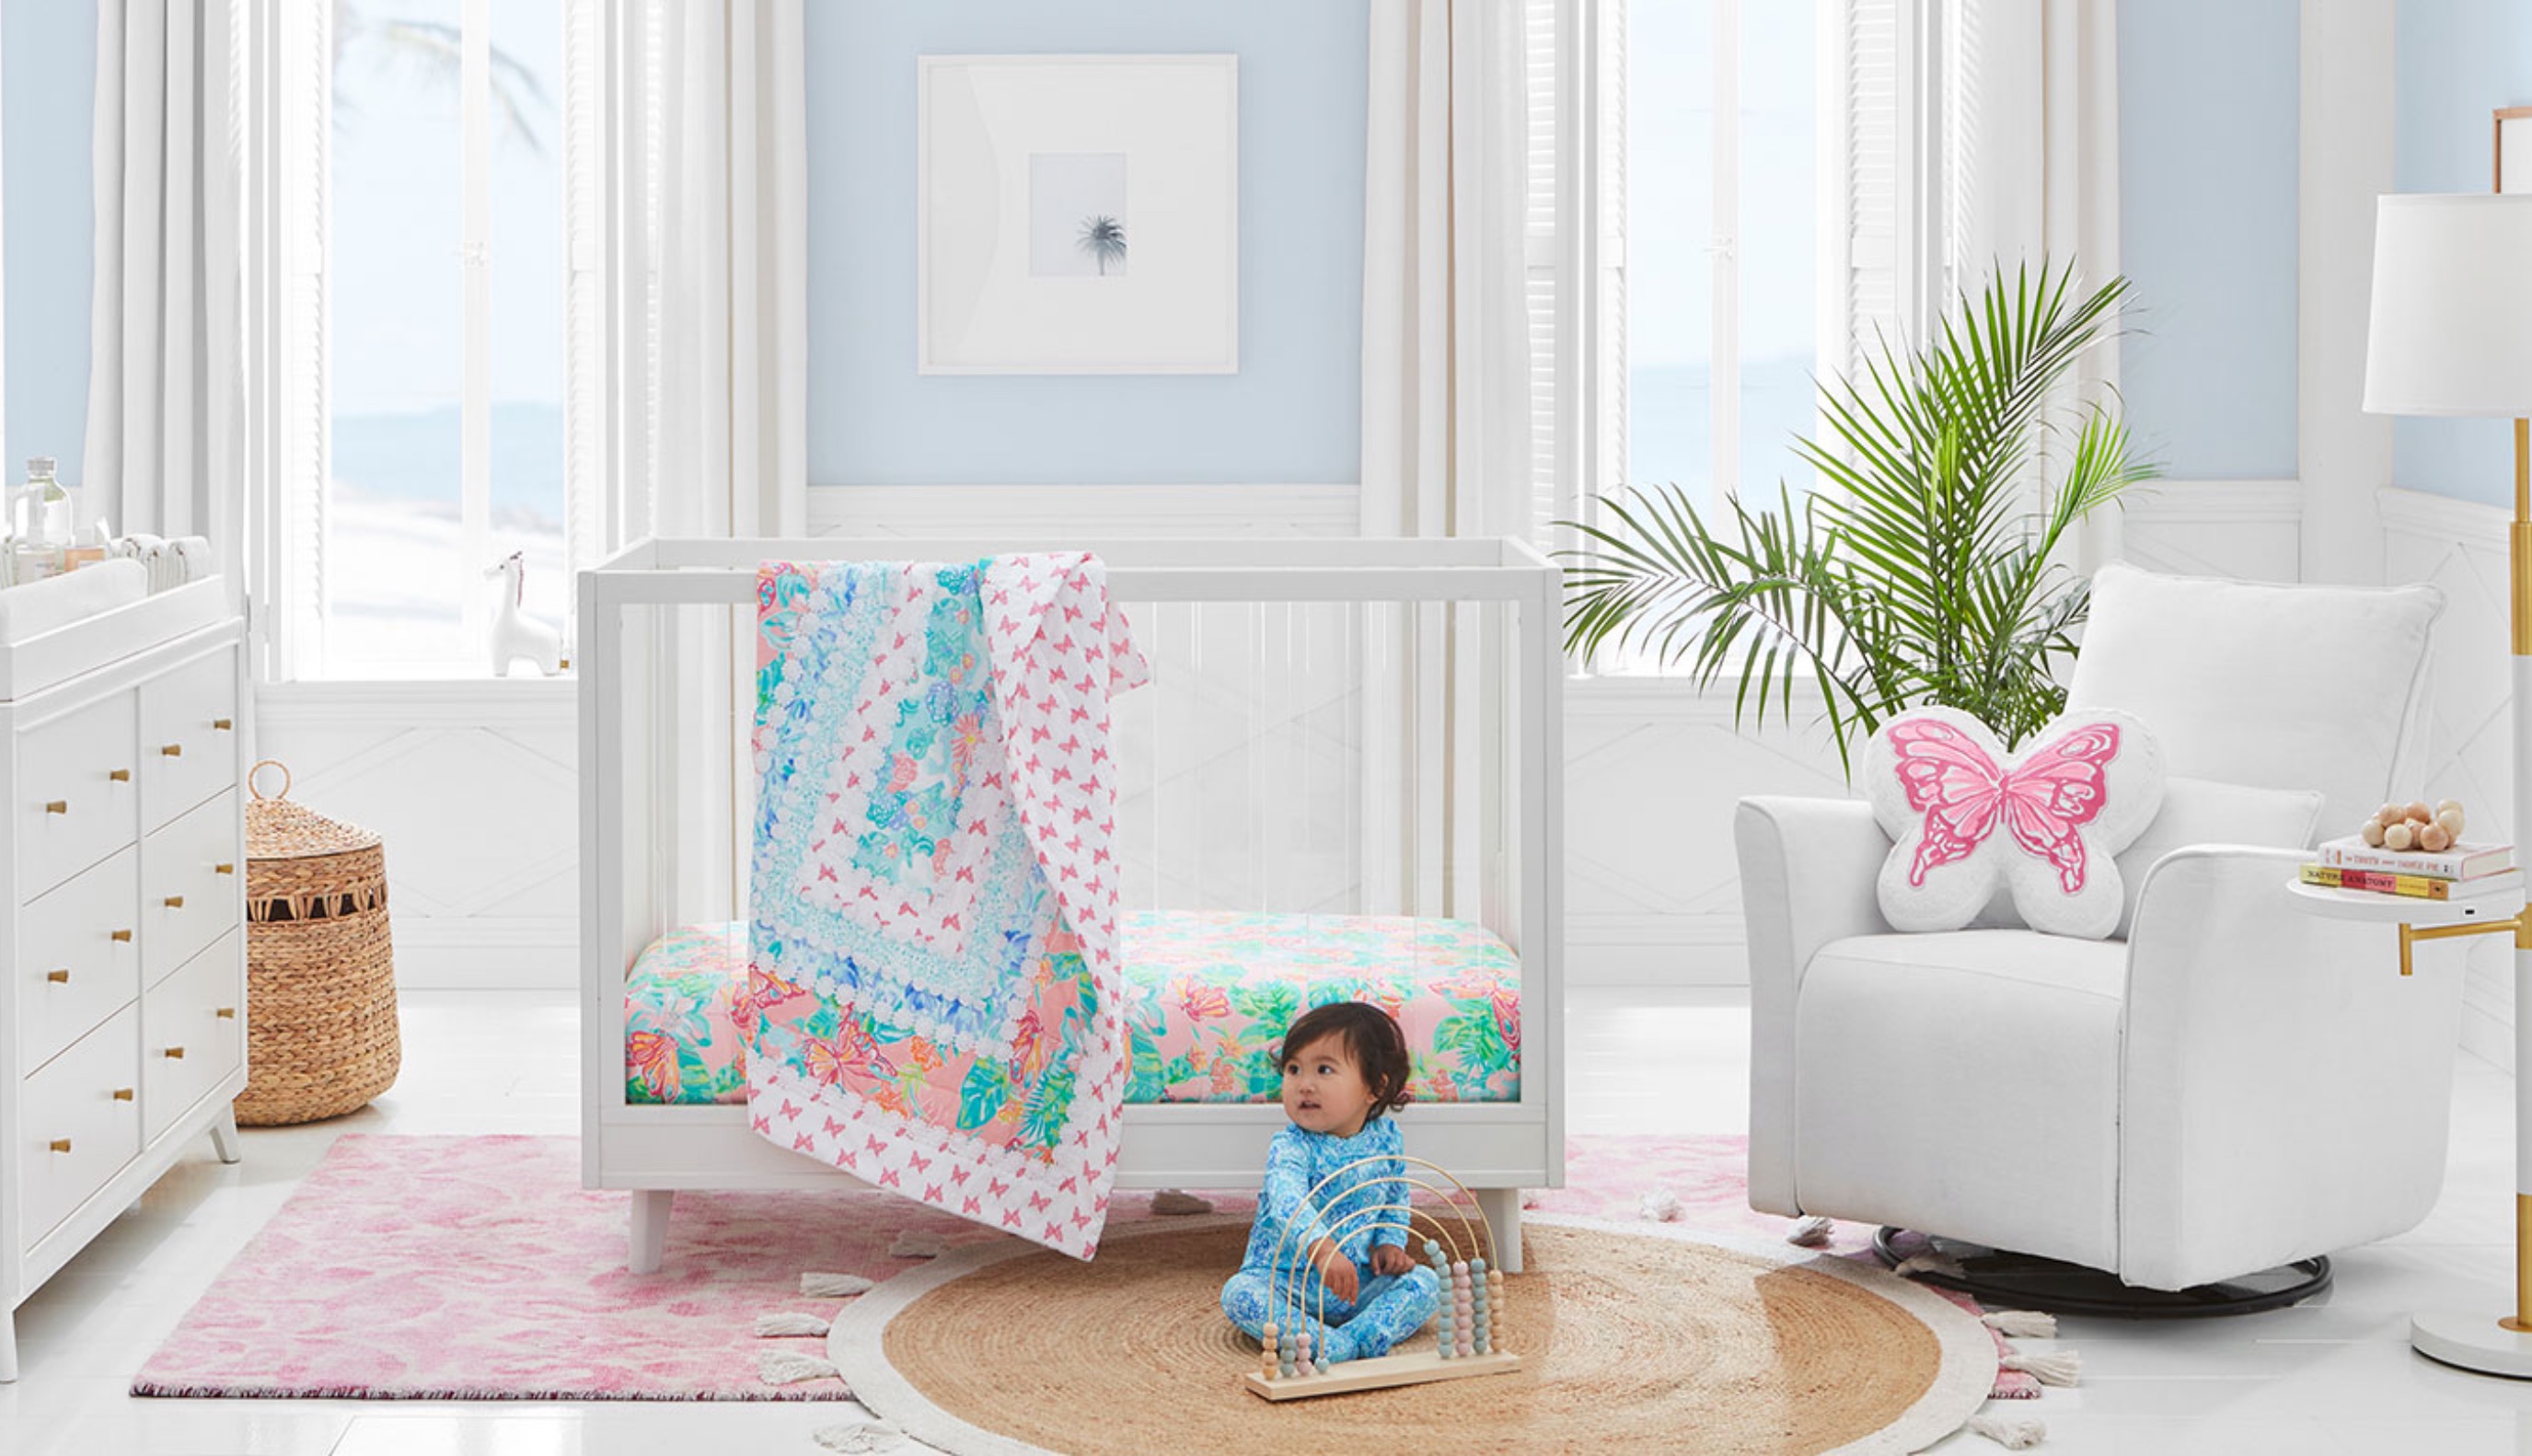 Lilly Pulitzer X Pottery Barn Kids Collection Debuts Eye Catching 9to5toys